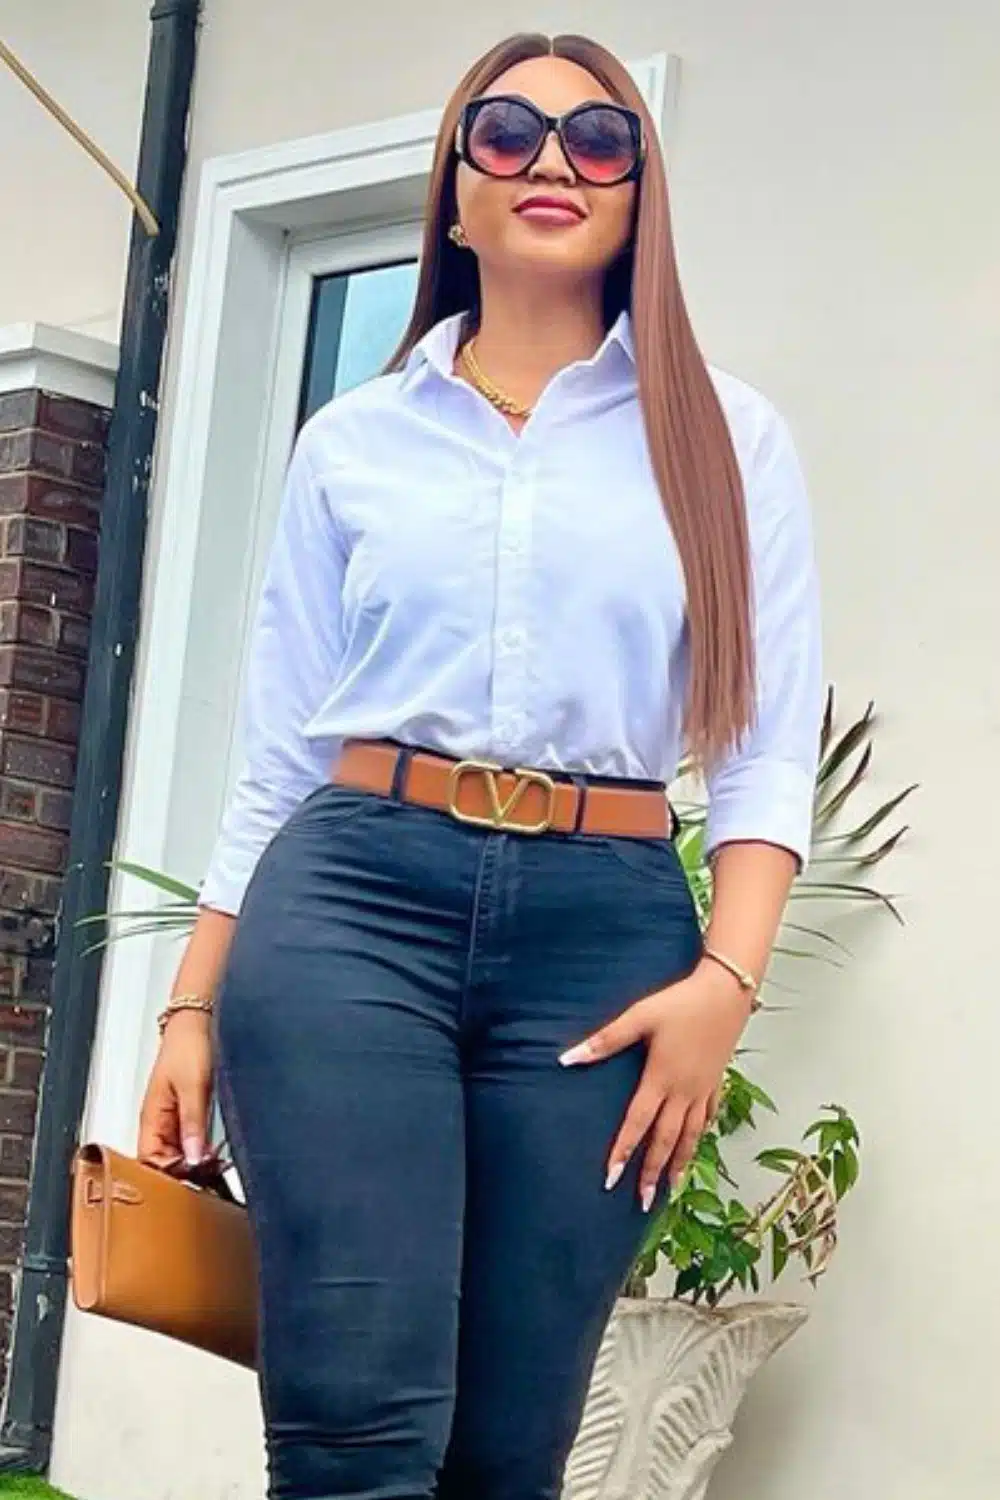 “Come out for governorship, we’ll support you” – Reactions as Regina Daniels visits Asaba Specialist hospital alone